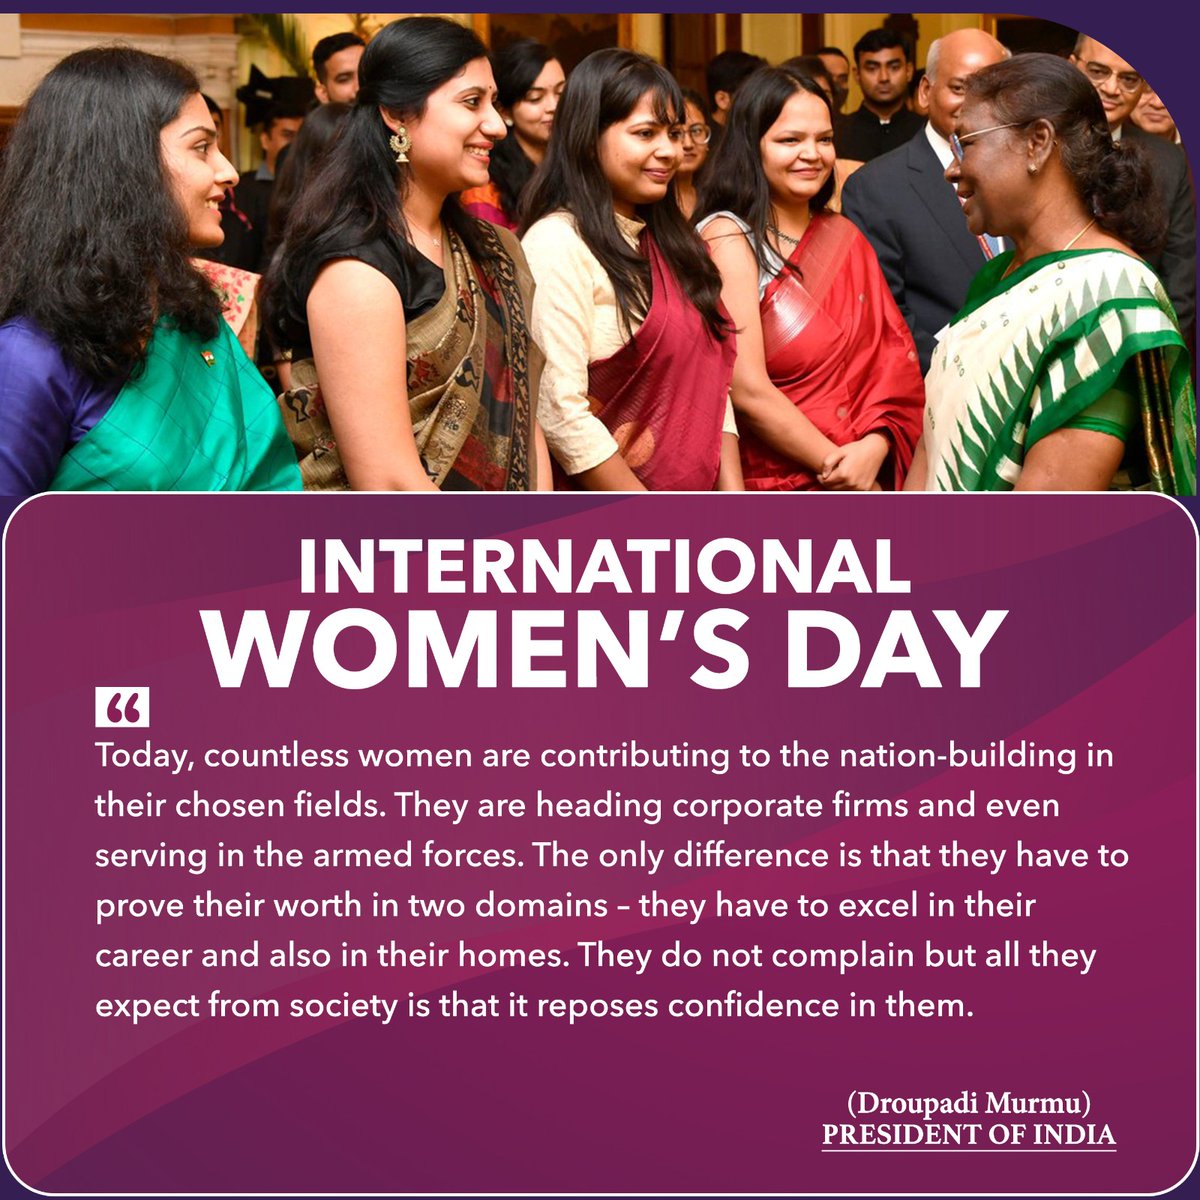 Today, countless women are contributing to the nation-building in their chosen fields.